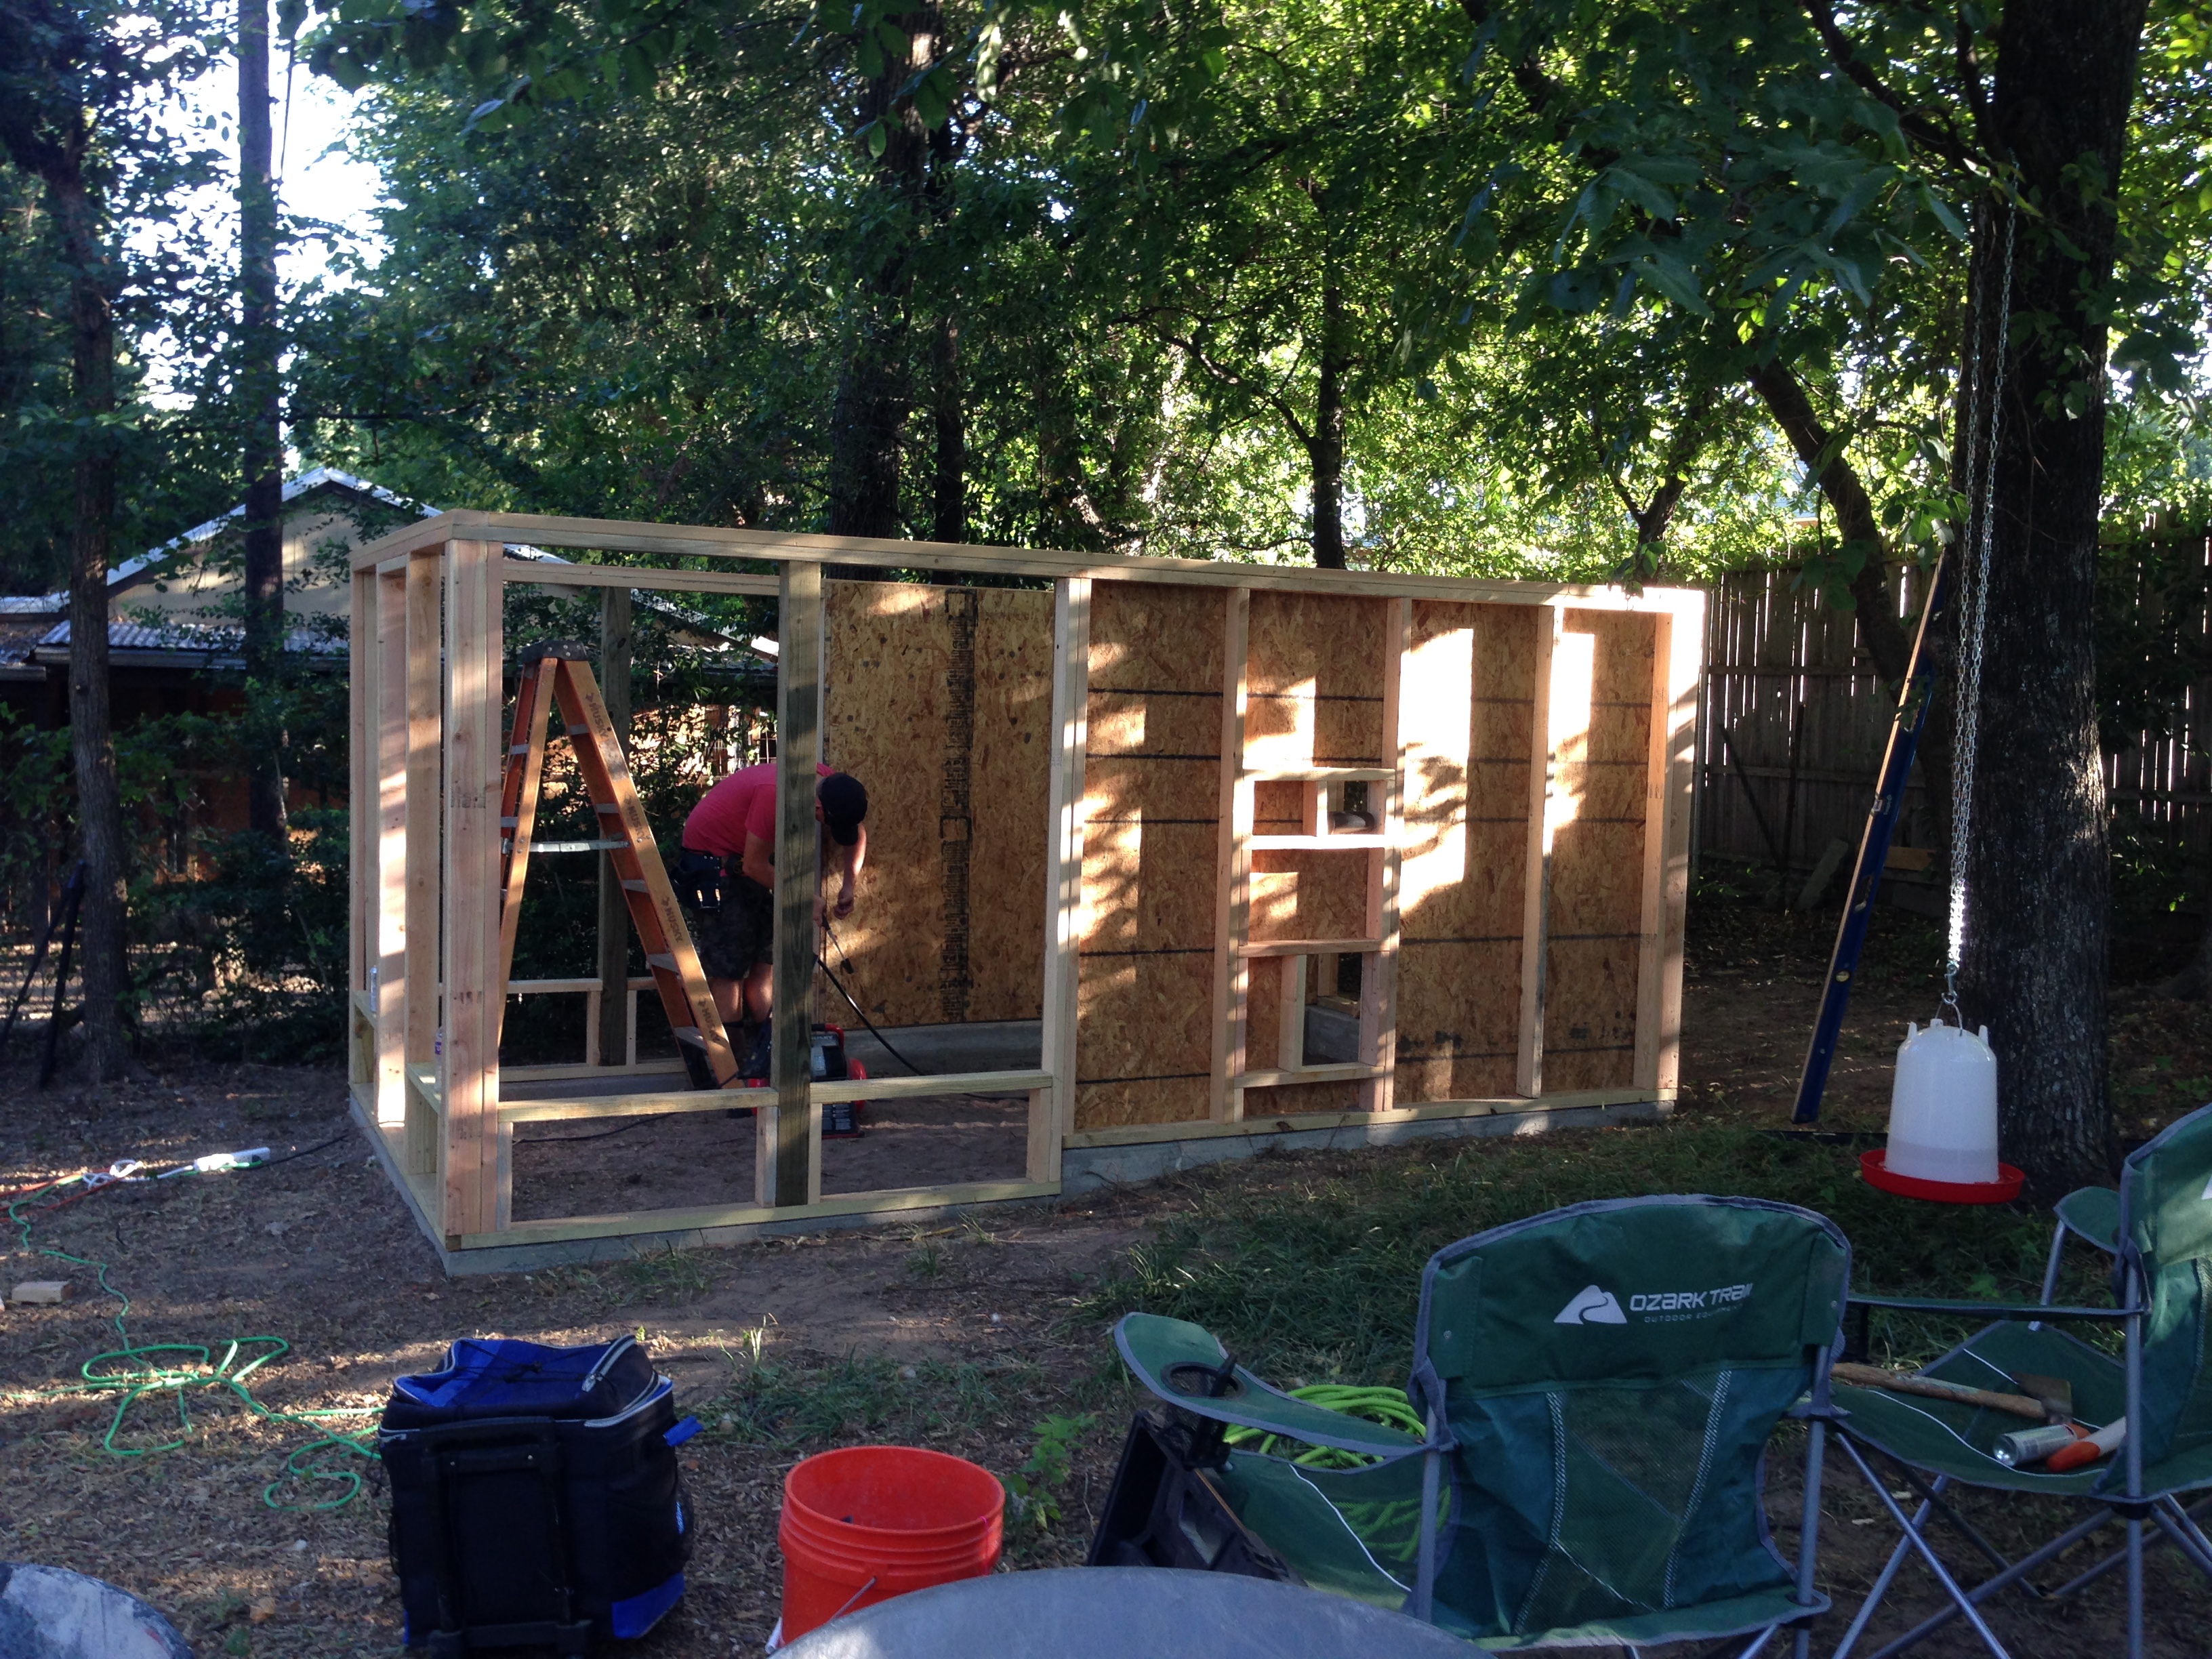 Putting up the interior walls 7/17/15